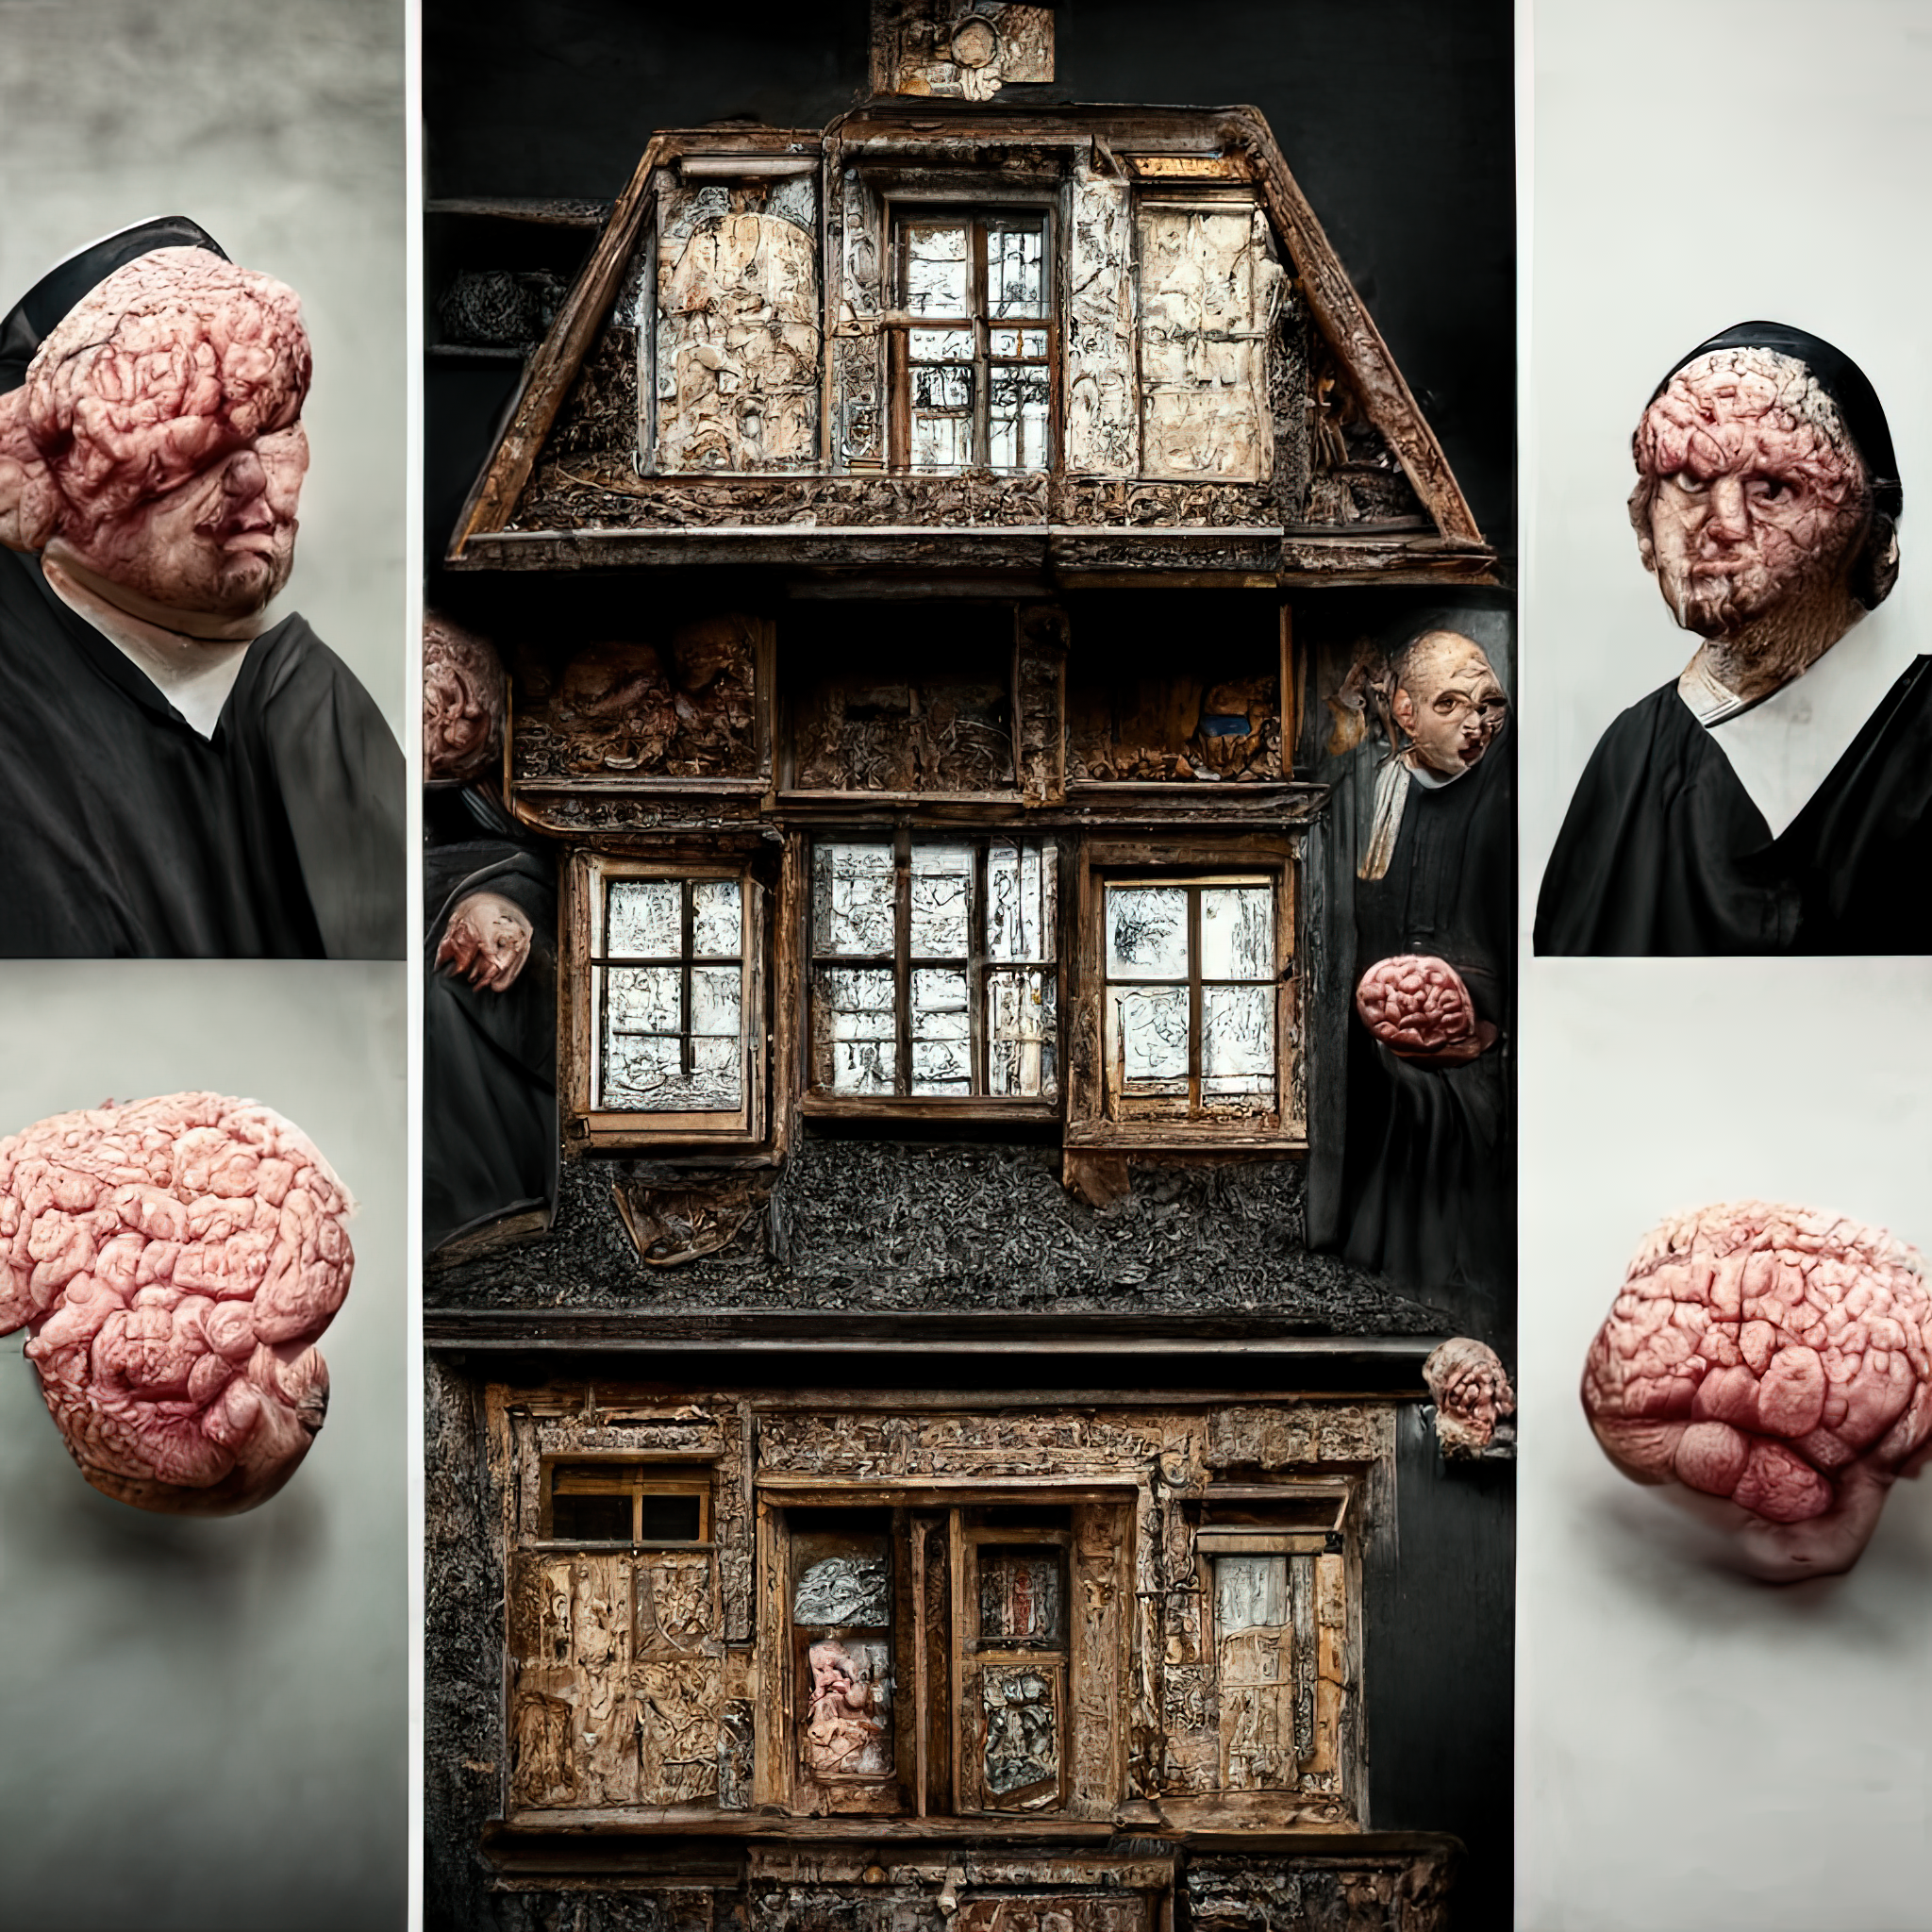 95616a72-dc59-4c65-bbb7-6e0cab8ce37a_verstaerker_httpss.mj.runyBvpaC__a_house_a_brain_operation_martin_luther__photoreal_details-art-scale-2_00x-gigapixel.png